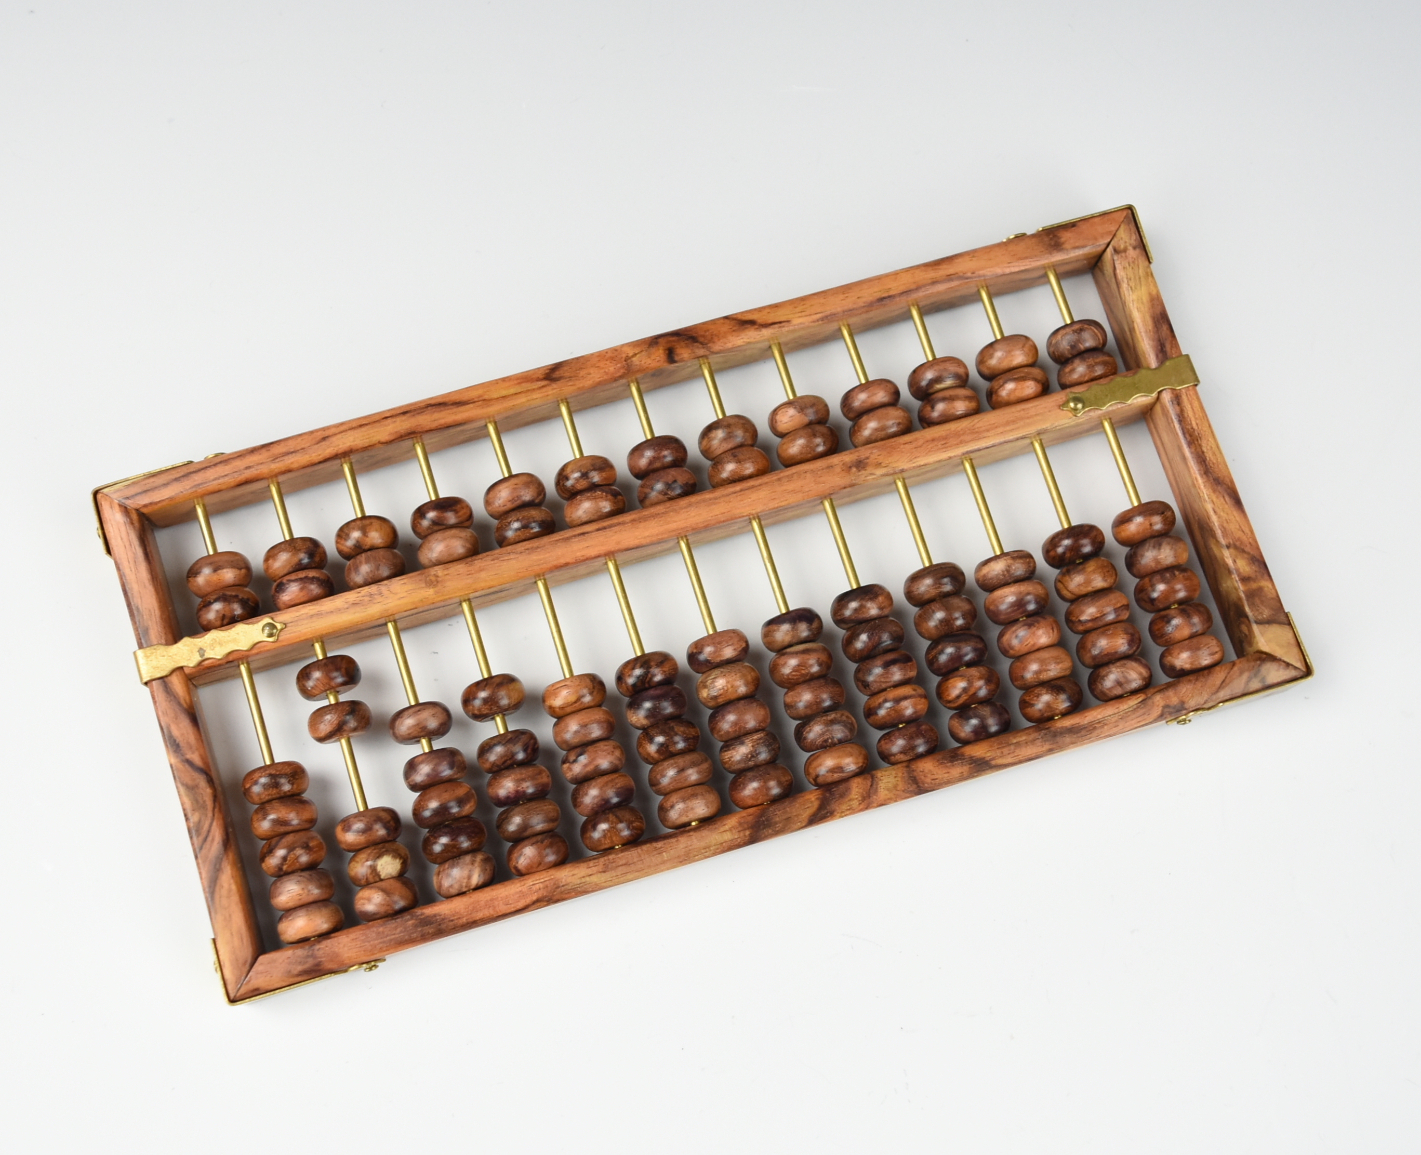 SMALL CHINESE HUANGHUALI WOOD ABACUS 2ced68